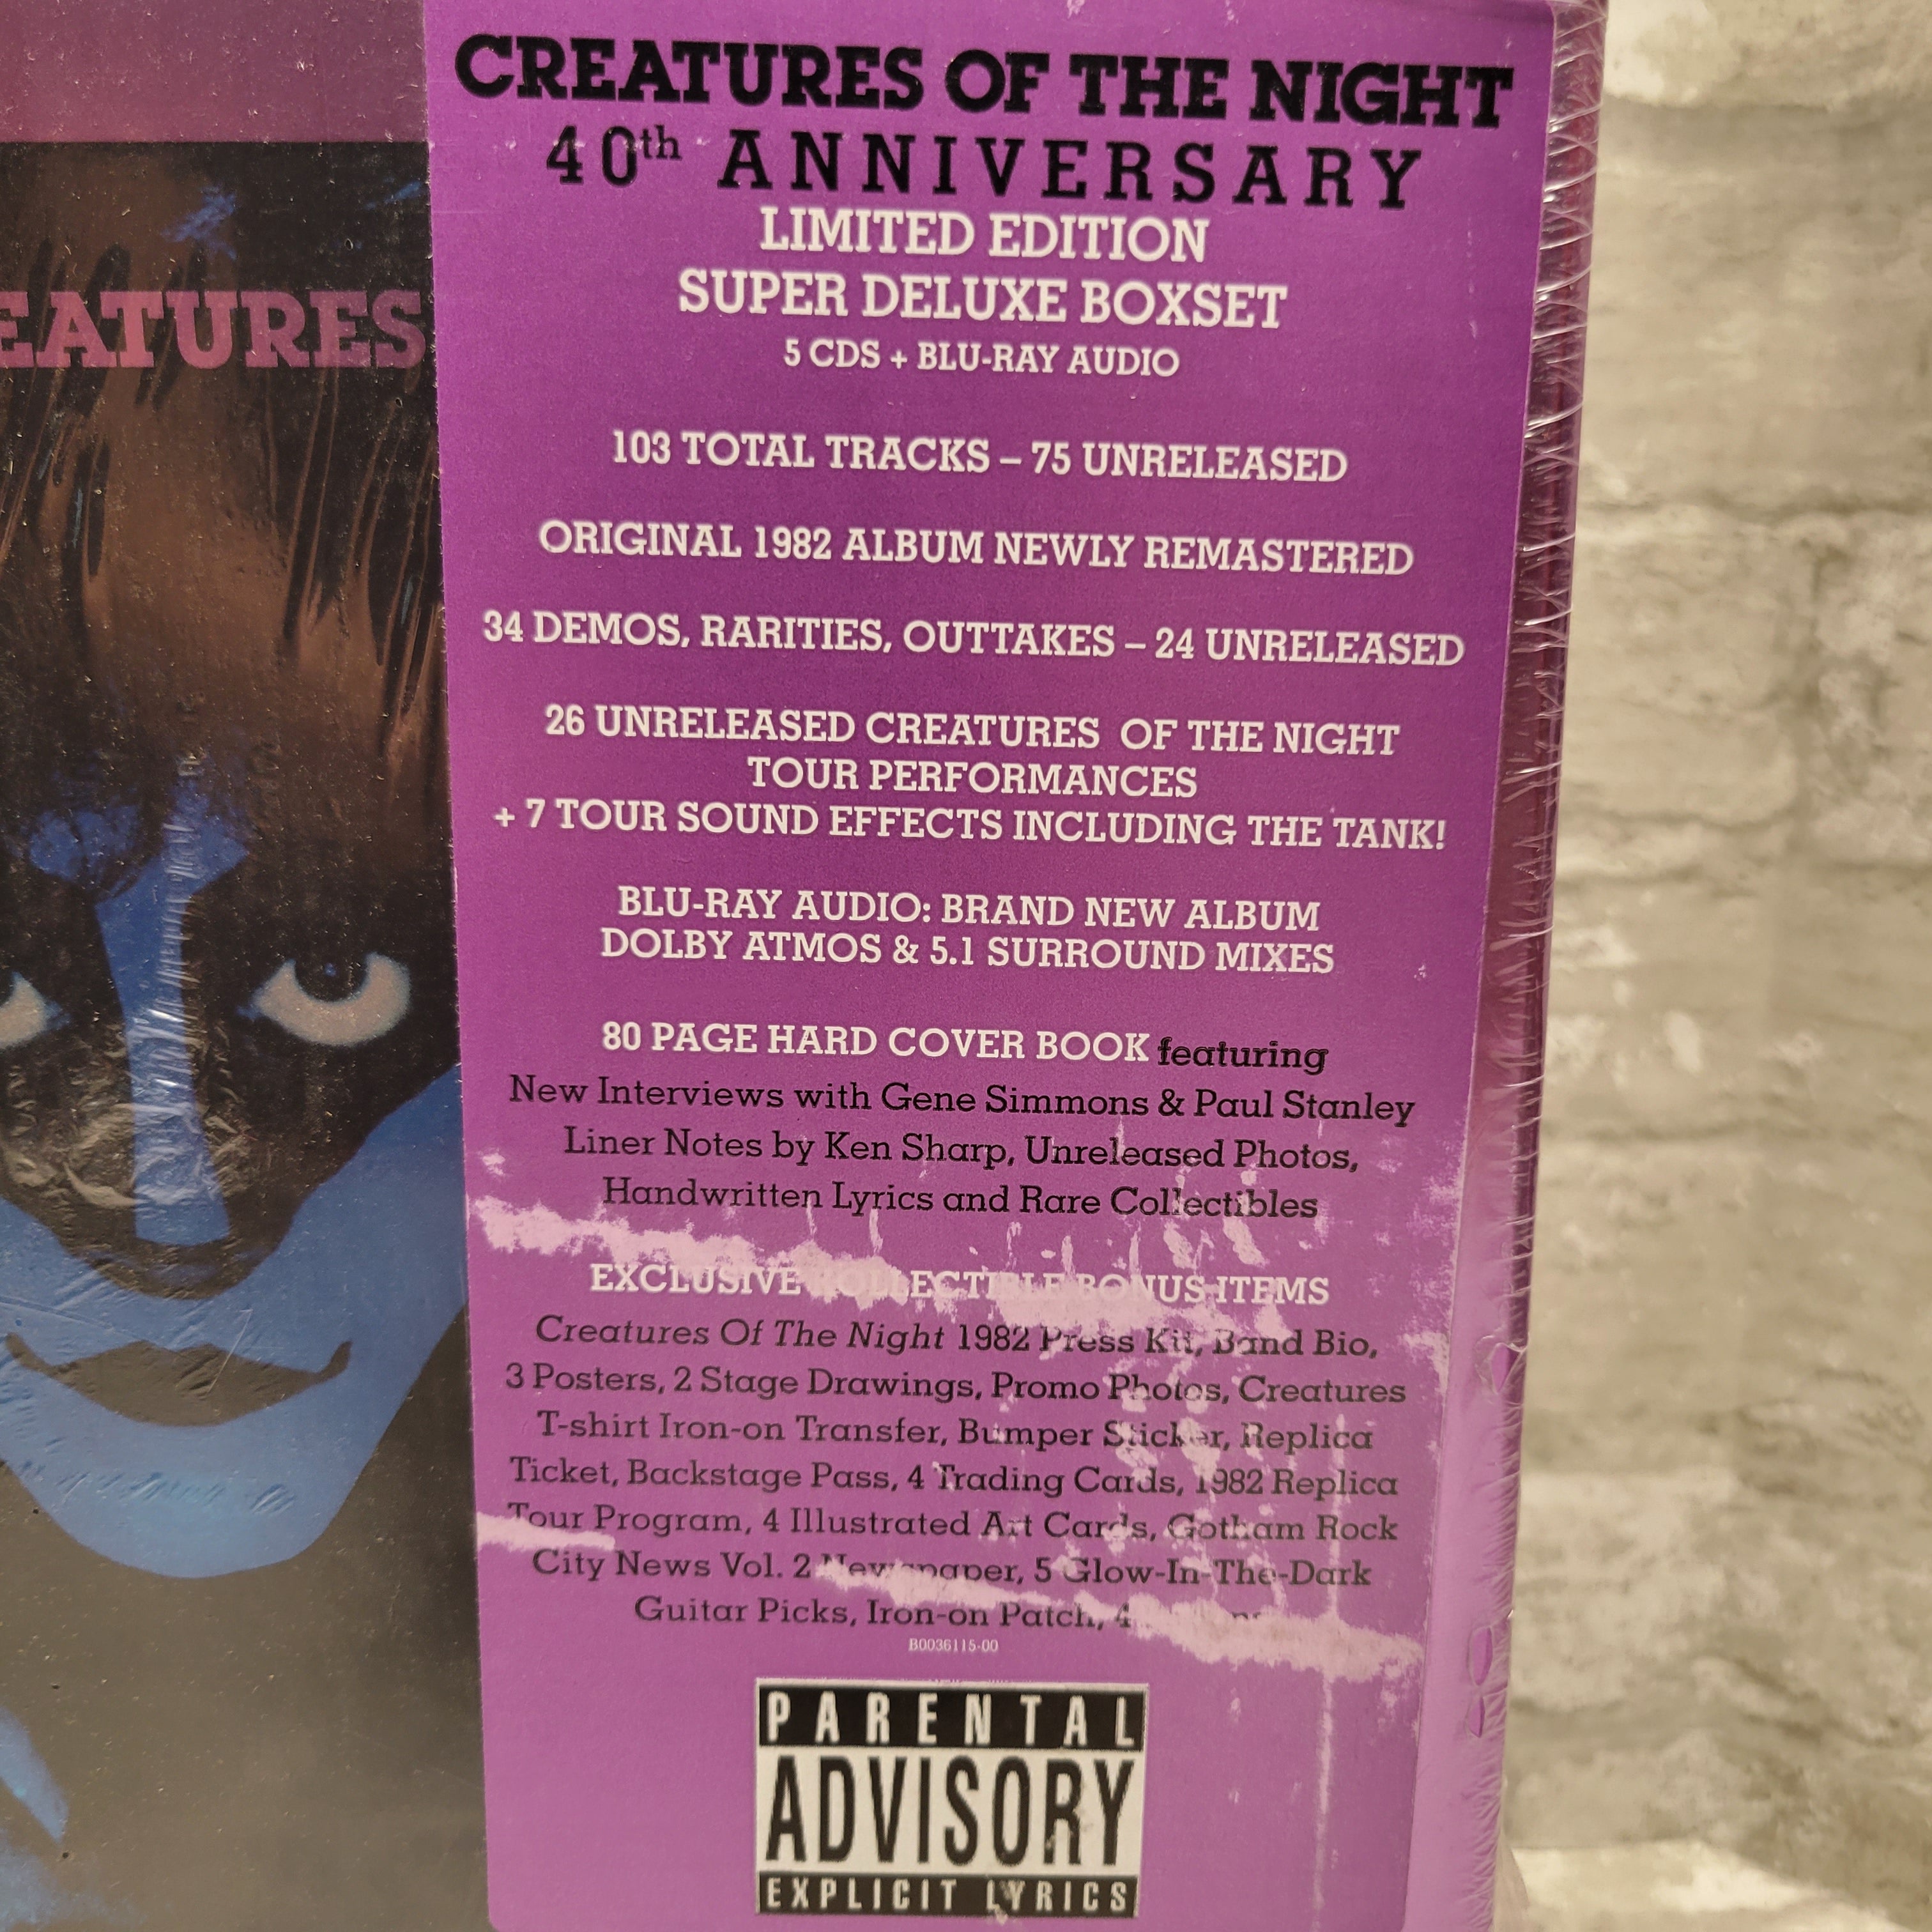 Kiss Creatures Of The Night 40th Anniversary Super Deluxe 5 CD/Blu-ray Audio (8089543409902)